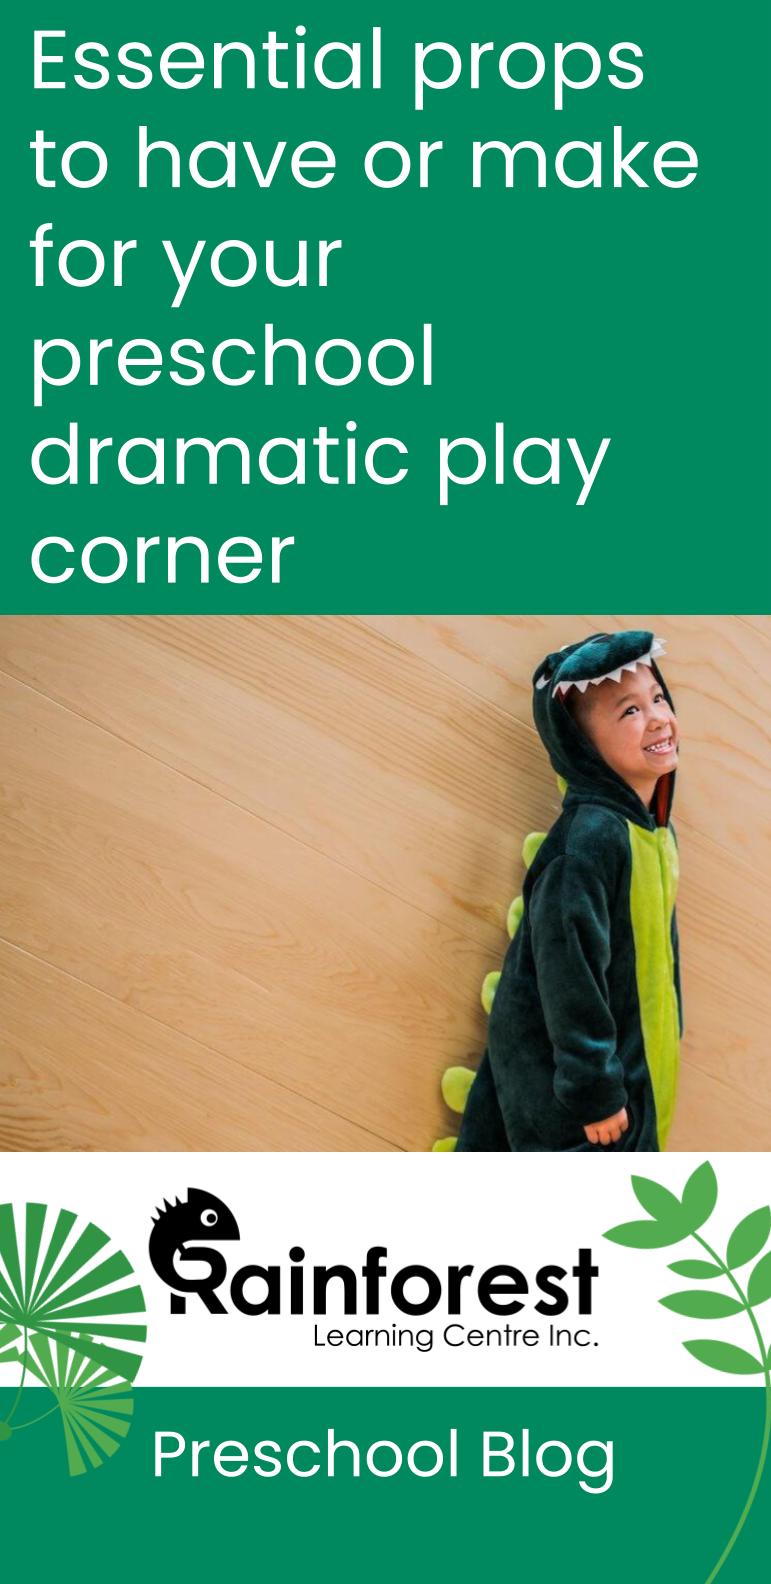 Essential props to have or make for your preschool dramatic play corner - blog pinterest image